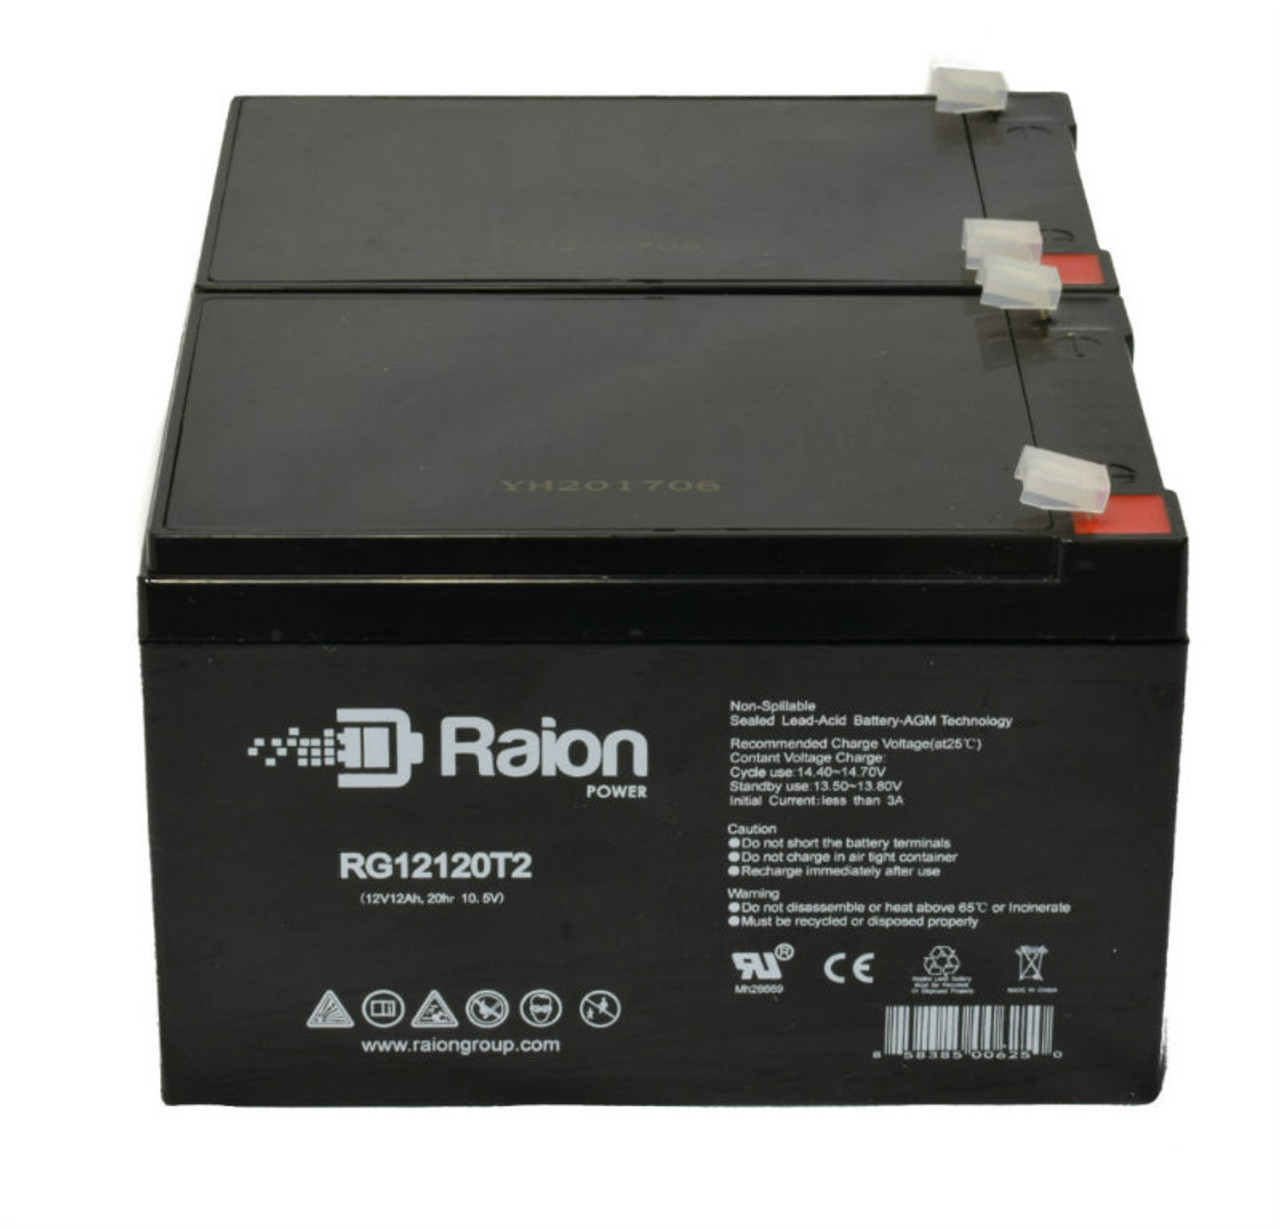 Raion Power 12V 12Ah Non-Spillable Compatible Replacement Battery for Cellpower CPL 12-12 - (2 Pack)